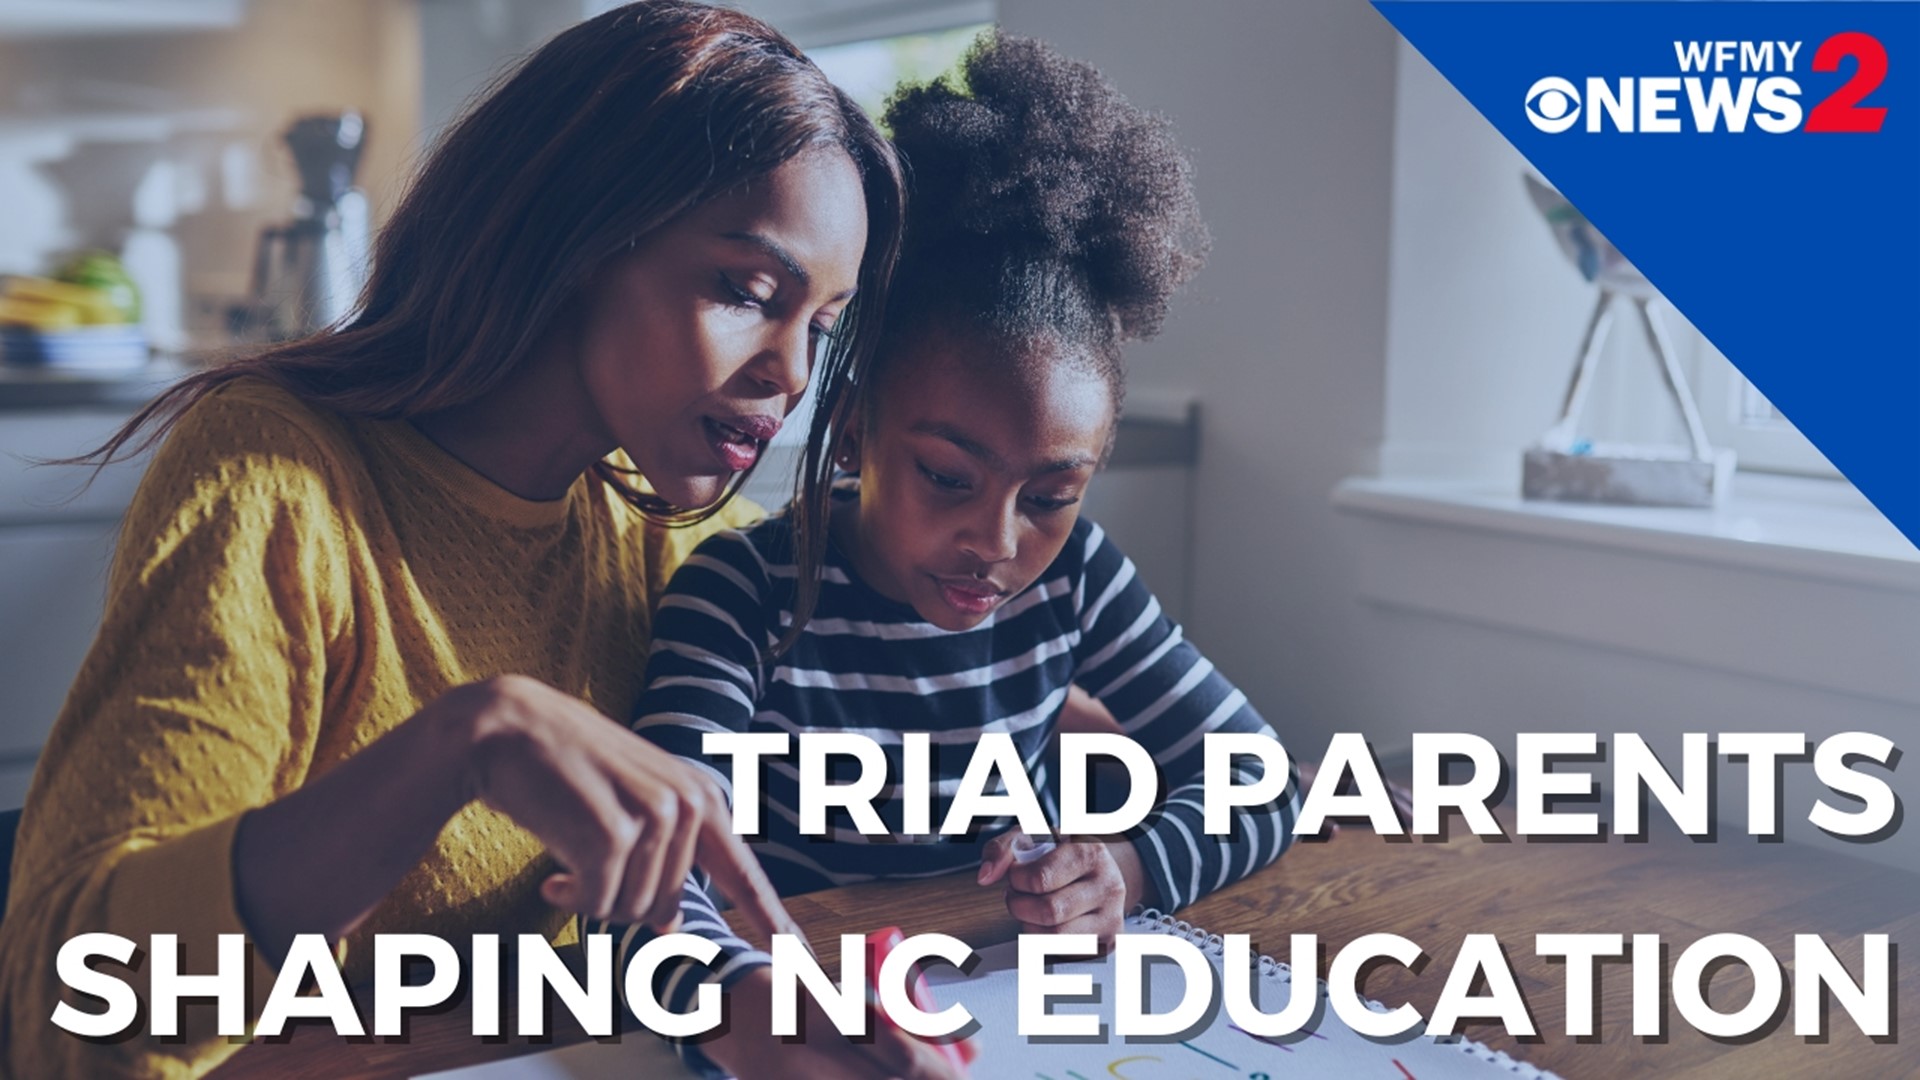 After 3,000 applicants applied for the Parent Advisory Commission, the State Superintendent announced that 48 were selected. Six are from the Triad.